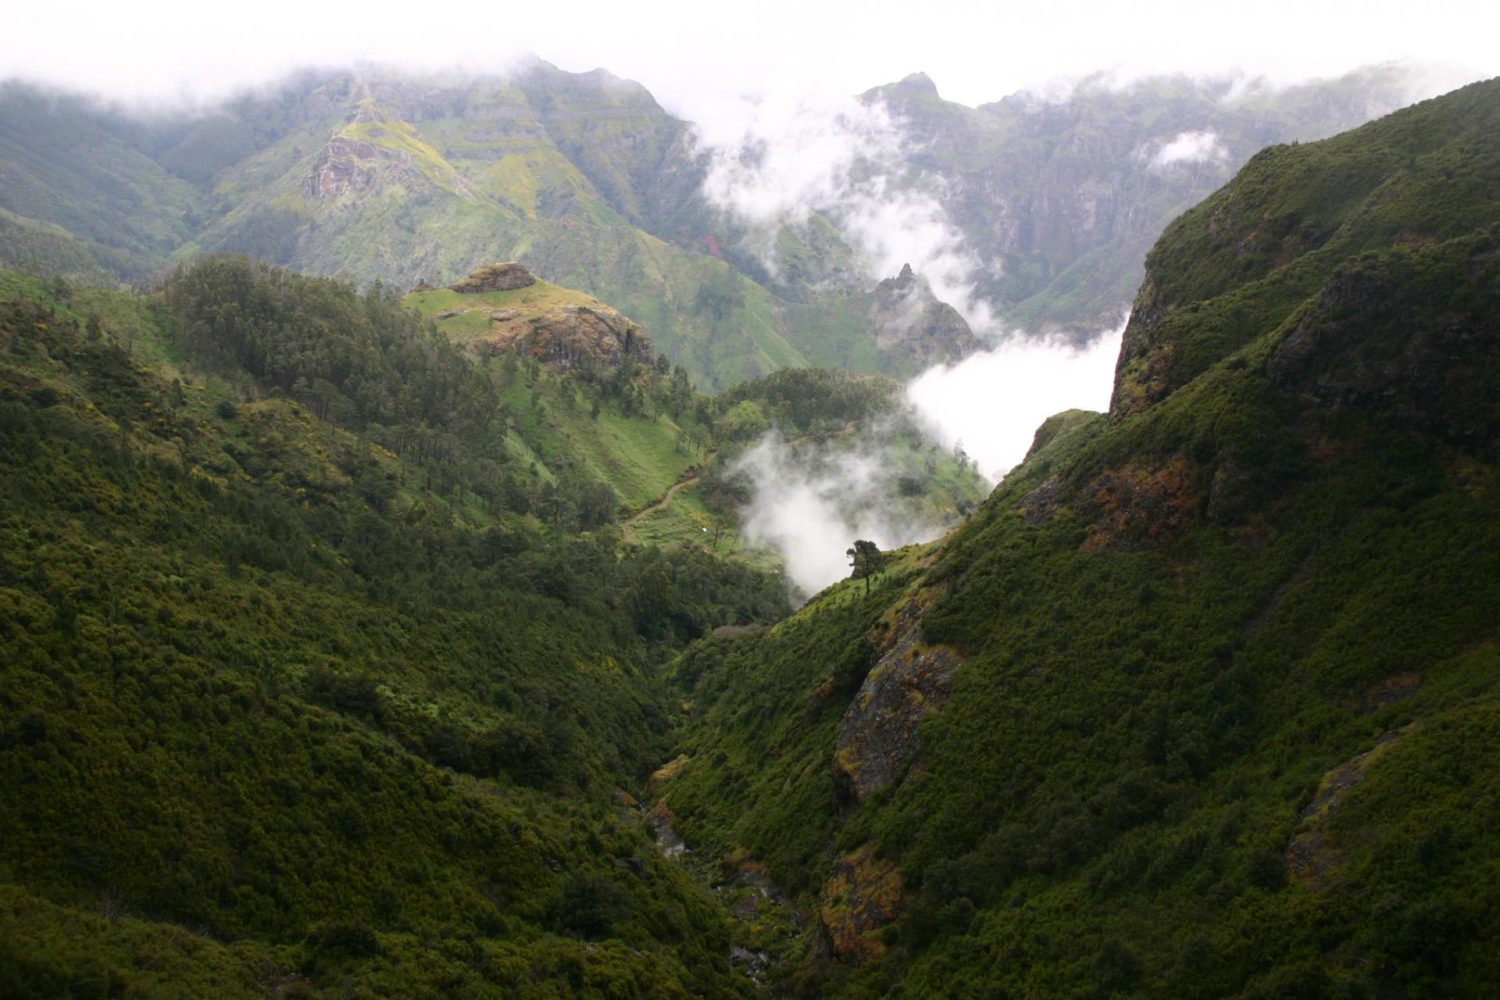 Self-guided hiking tour of Portugal's Madeira Island